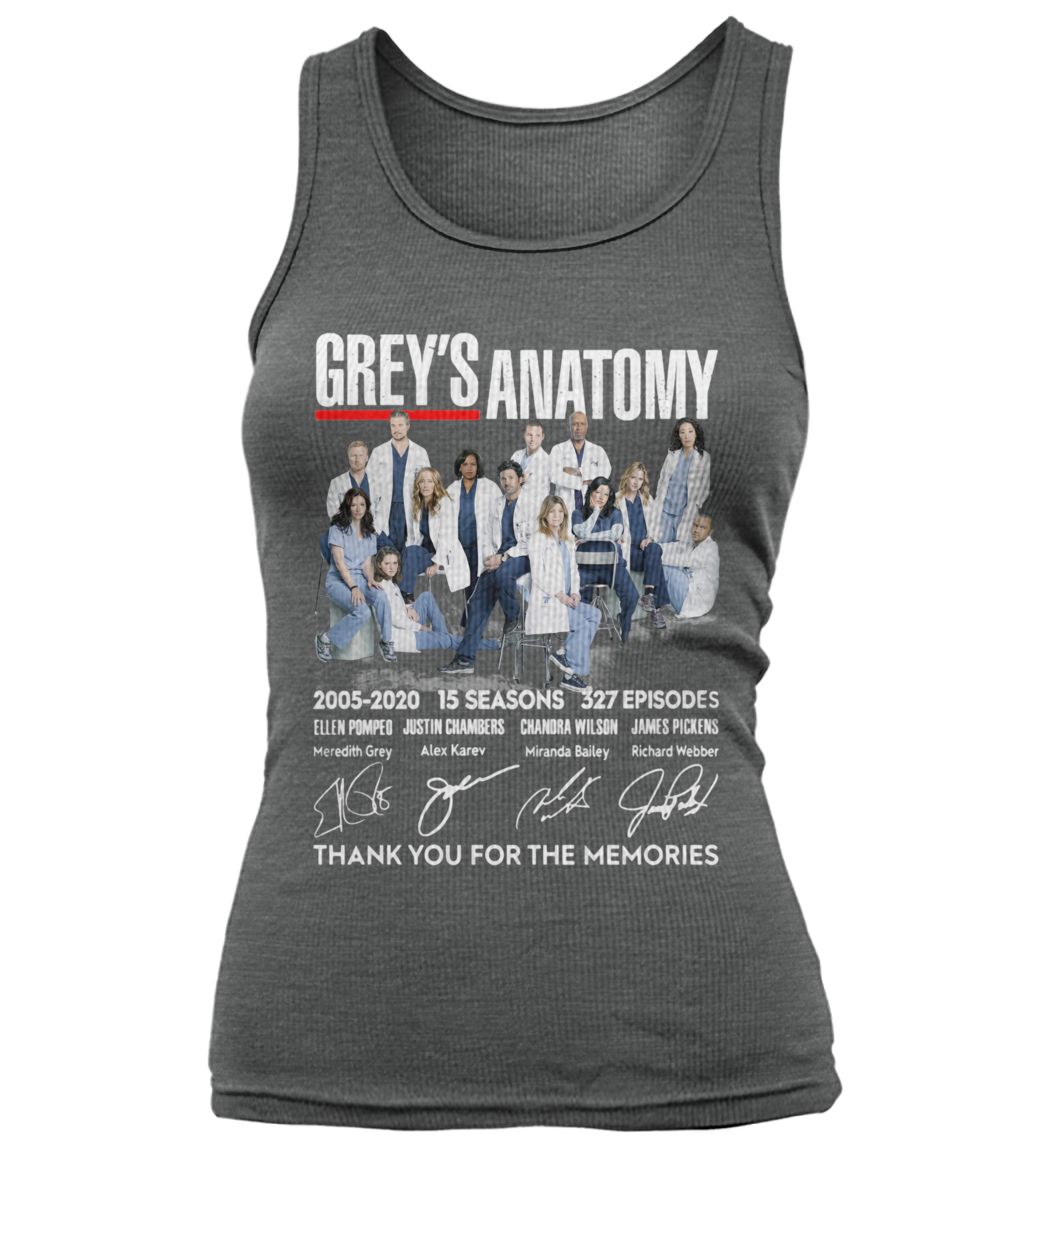 Grey's anatomy 2005-2020 15 seasons 327 episode thank you for the memories signatures women's tank top